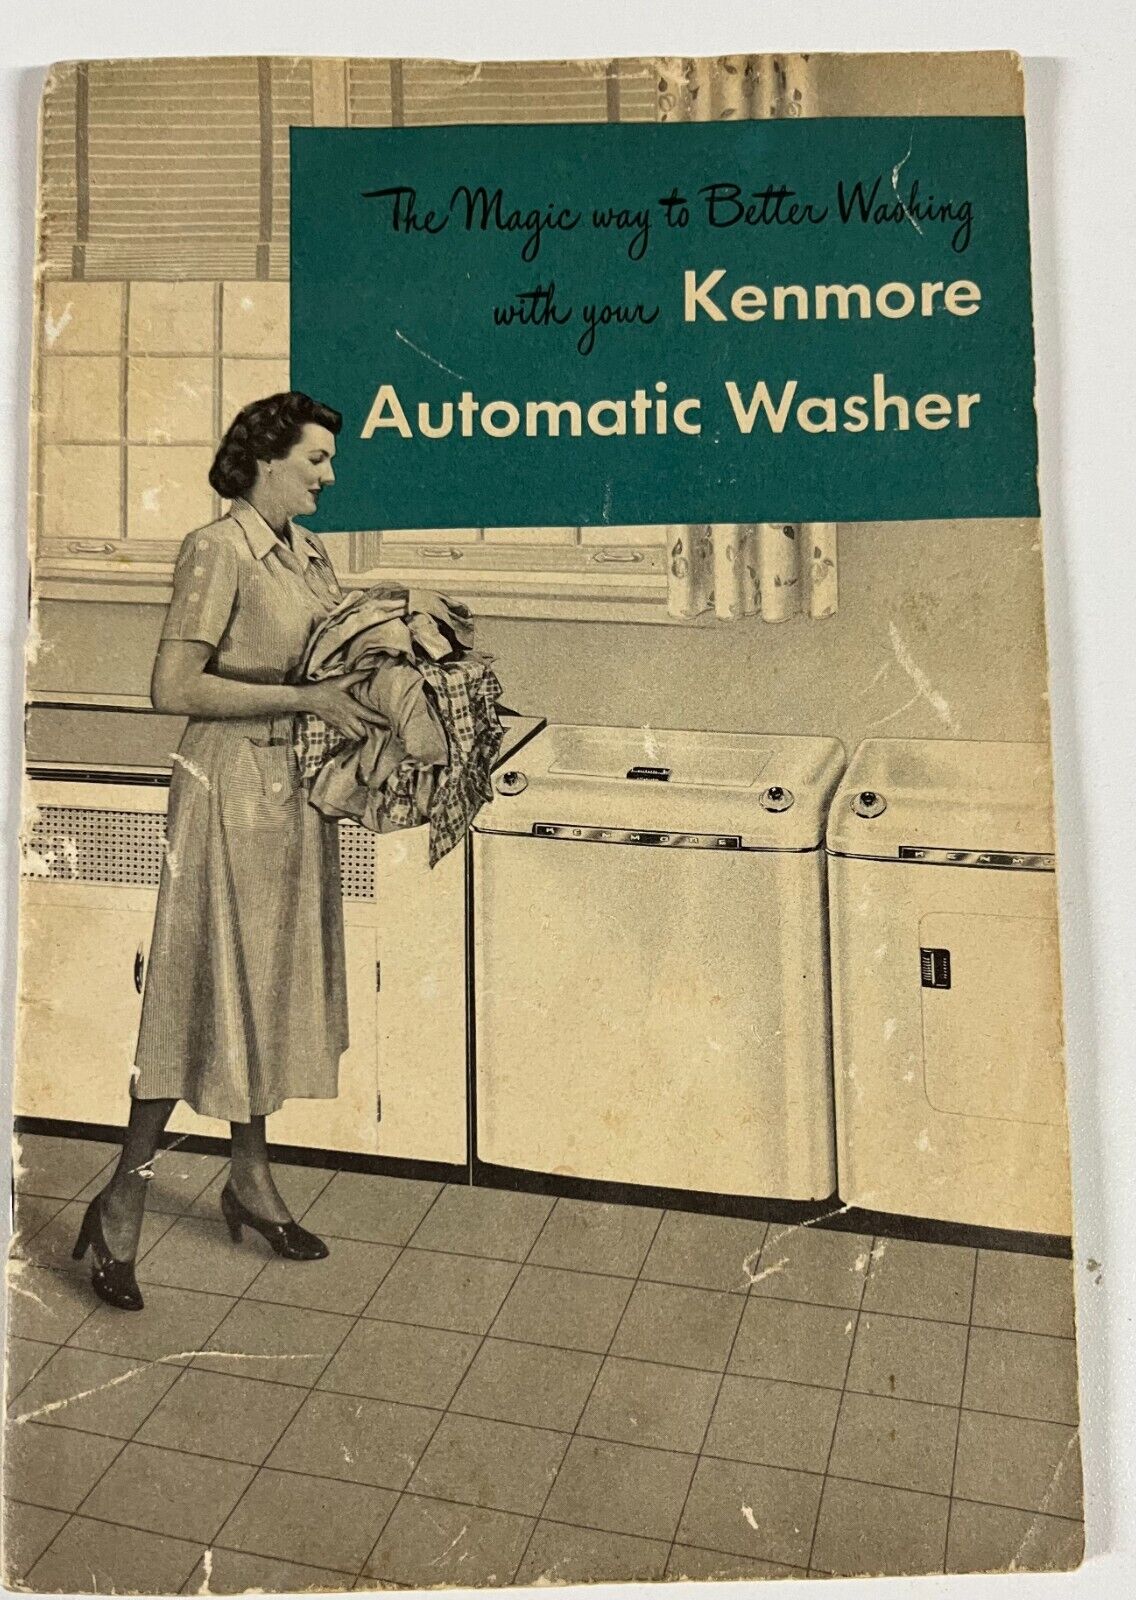 Vintage Sears Kenmore Owners Manuals for Automatic Washer & Dishwasher